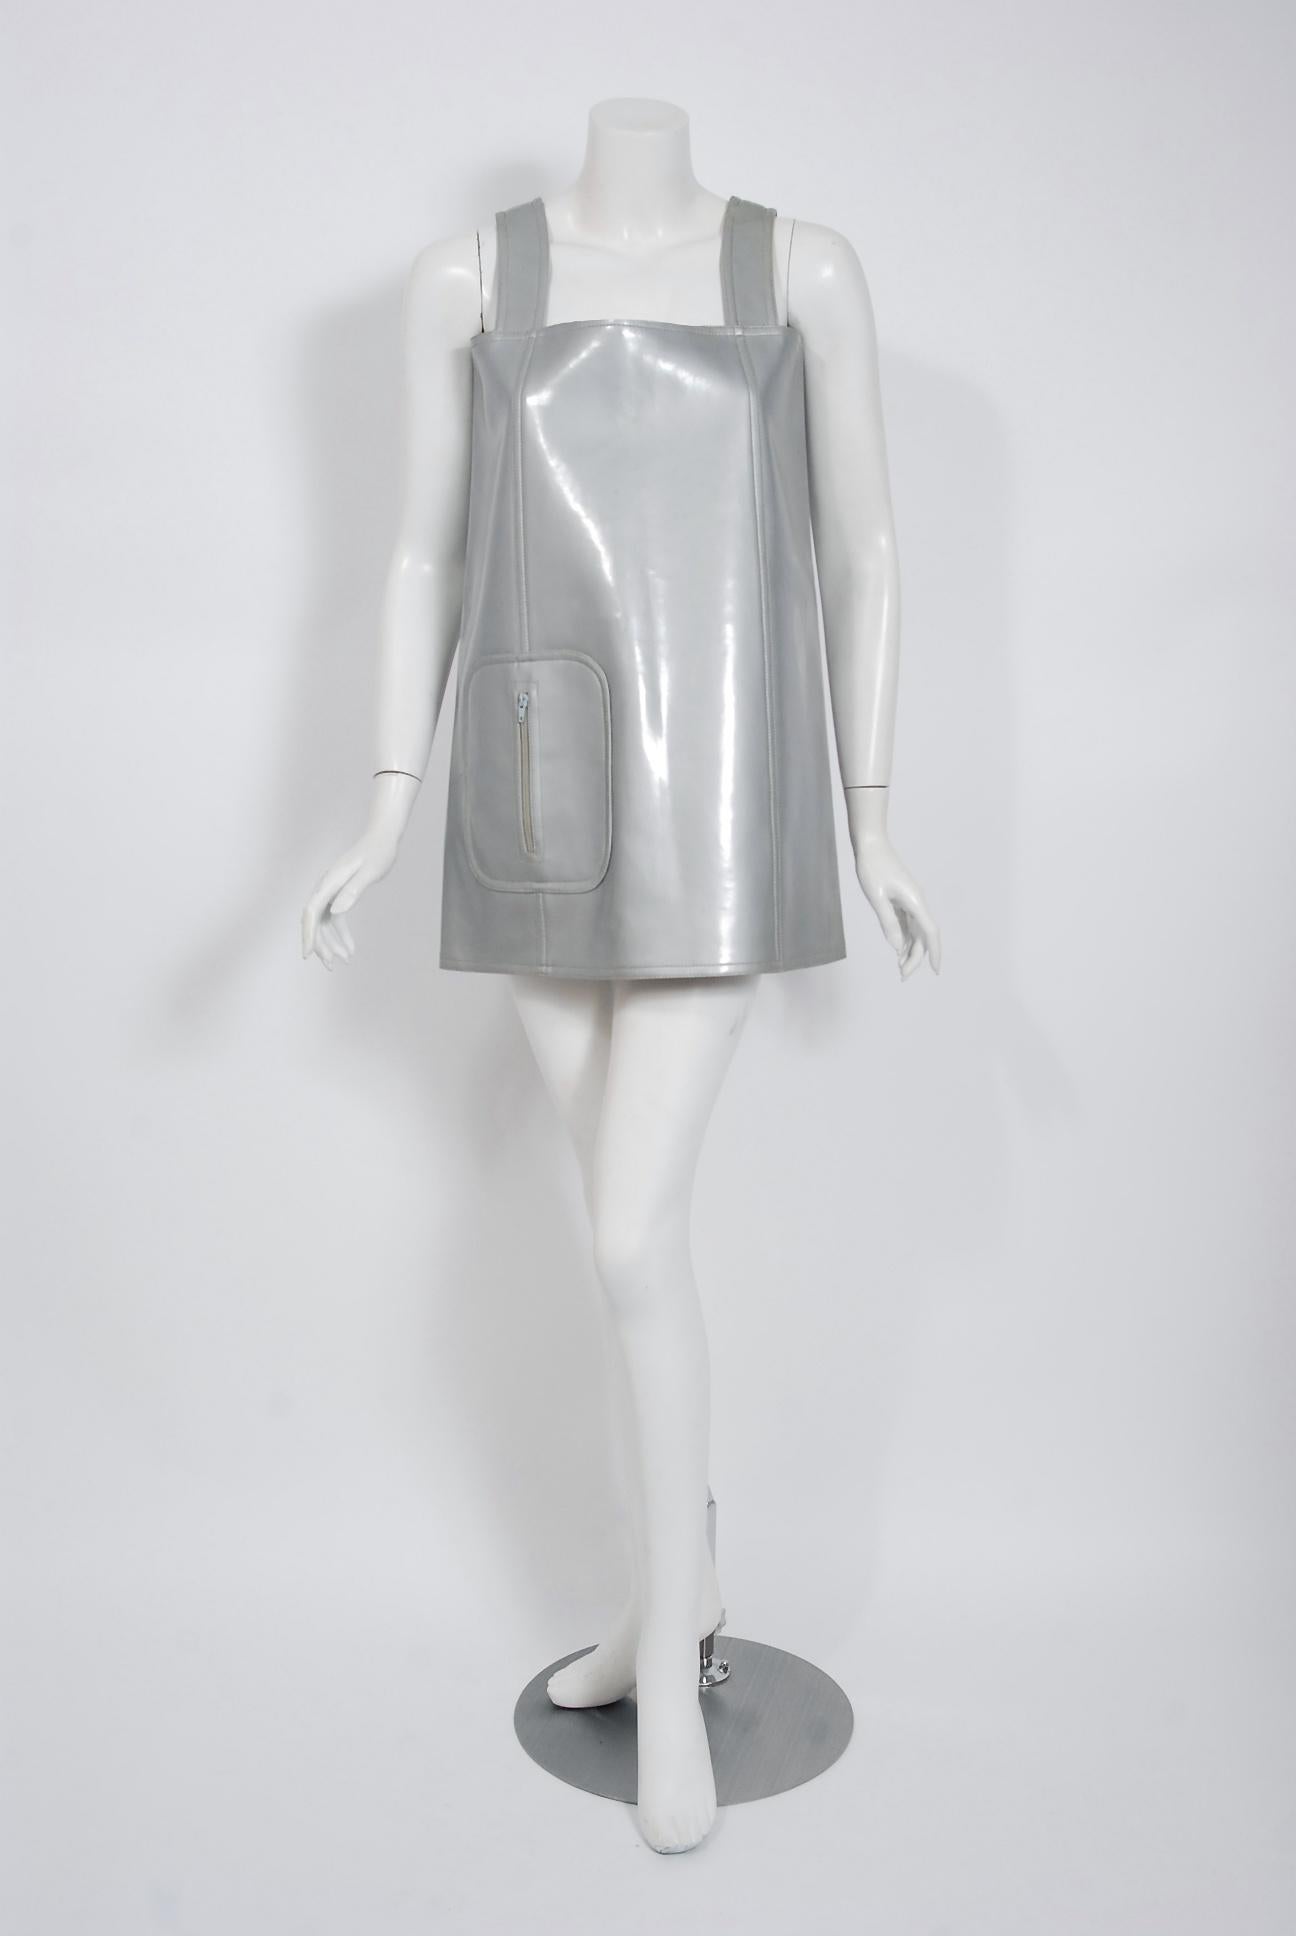 A rare Christian Dior documented silver vinyl mini dress dating back to their 1970 spring/summer collection.  The Colifichets boutique was found on the ground floor of the Dior Haute Couture atelier at 30 Avenue Montaigne in Paris. It allowed Dior